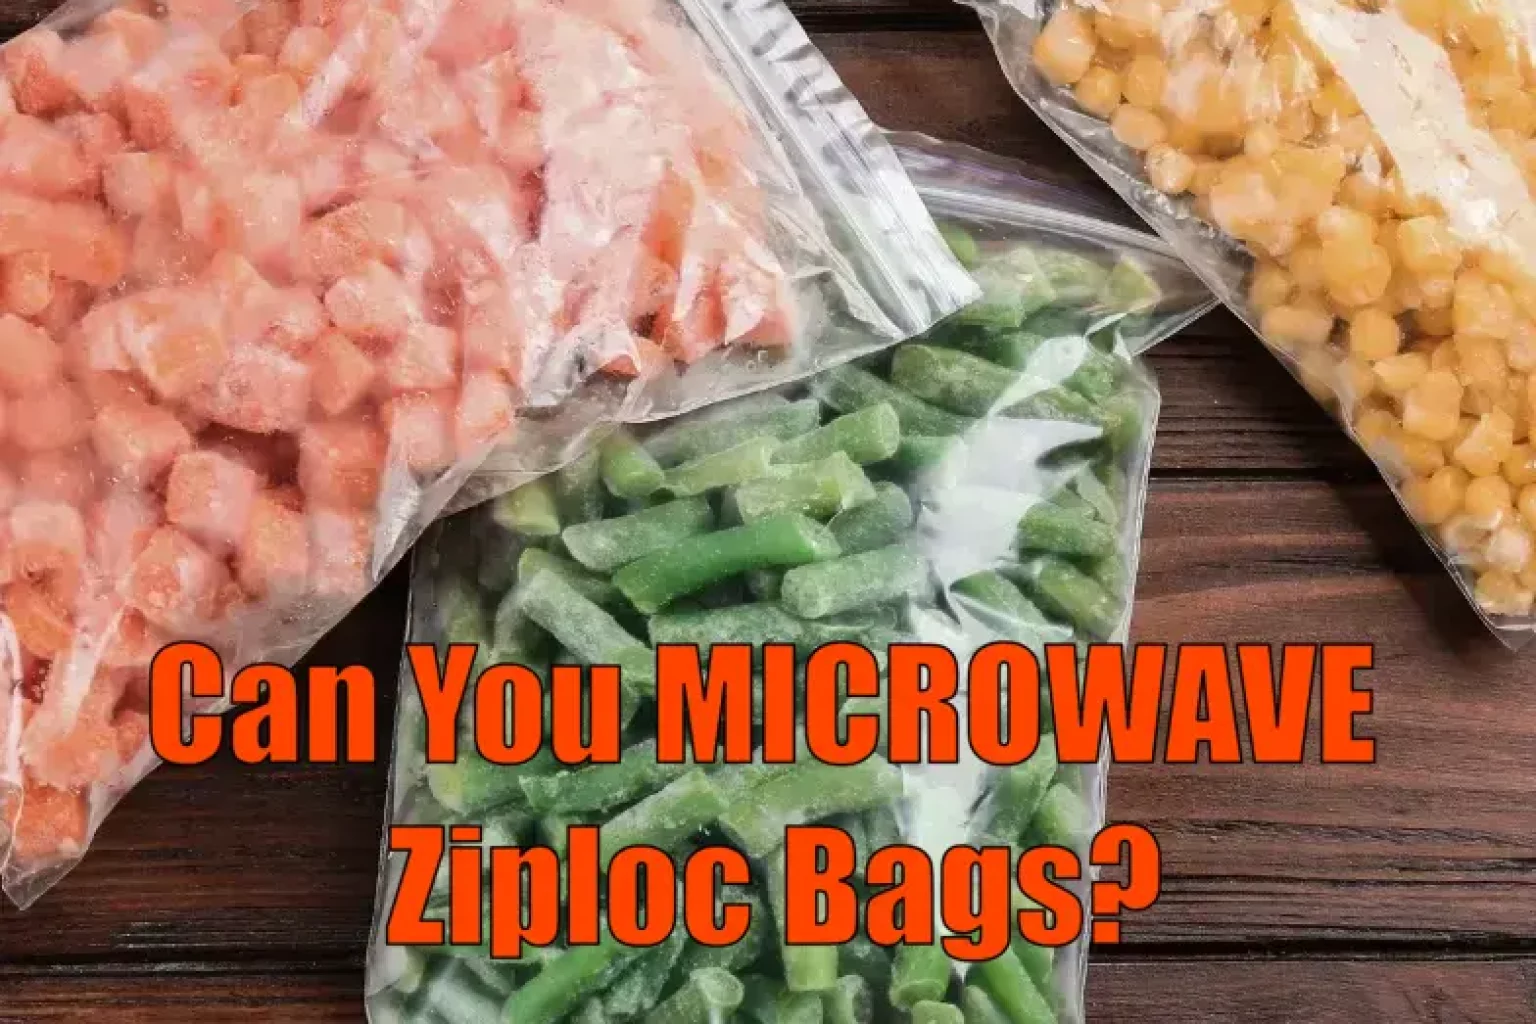 Can you microwave ziploc bags safely